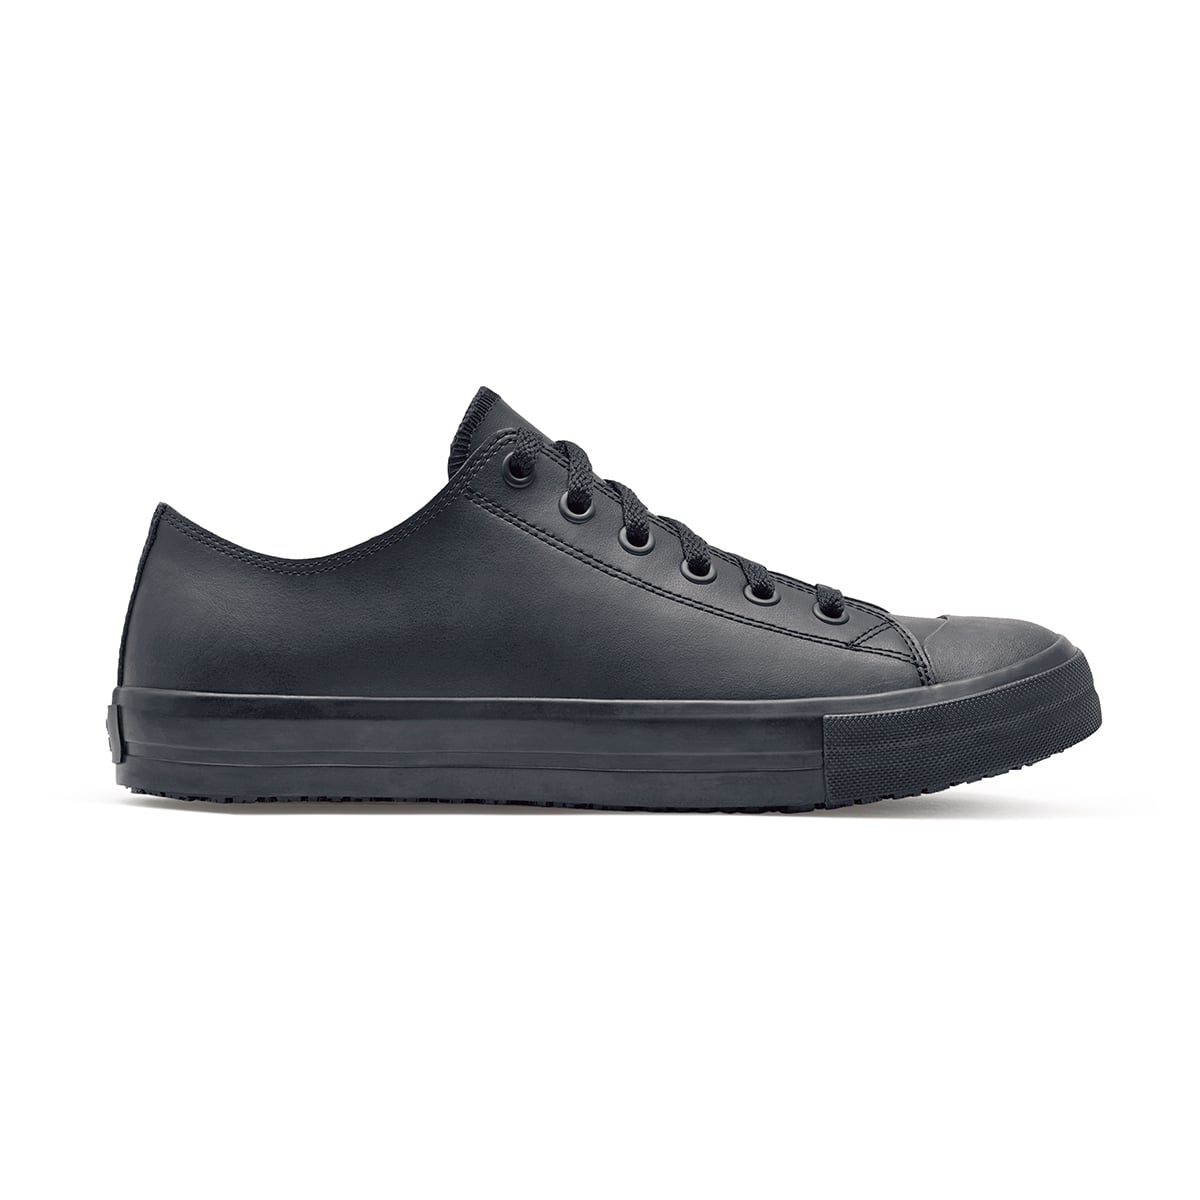 The Delray from Shoes For Crews is a lace-up shoe that has a slip-resistant upper sole with a tapered edge to prevent the risk of trips and falls, seen from the right.